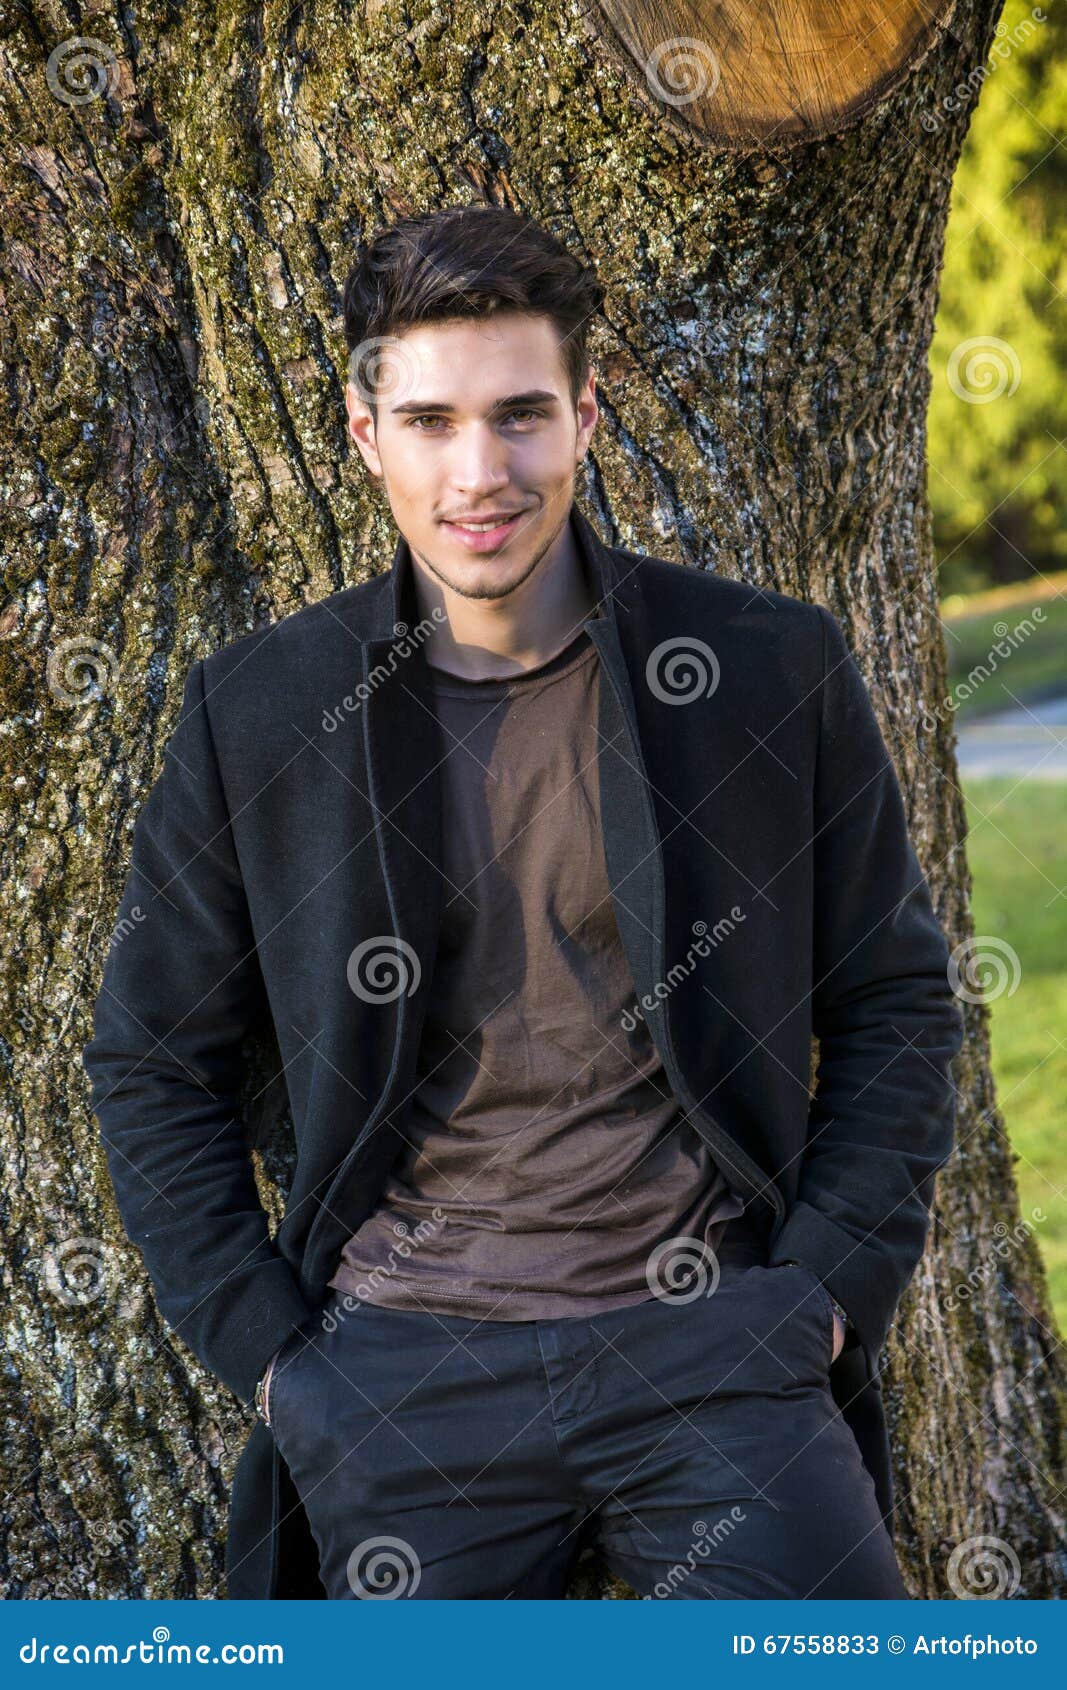 Handsome Young Man Leaning Against Tree Stock Image - Image of smiling ...